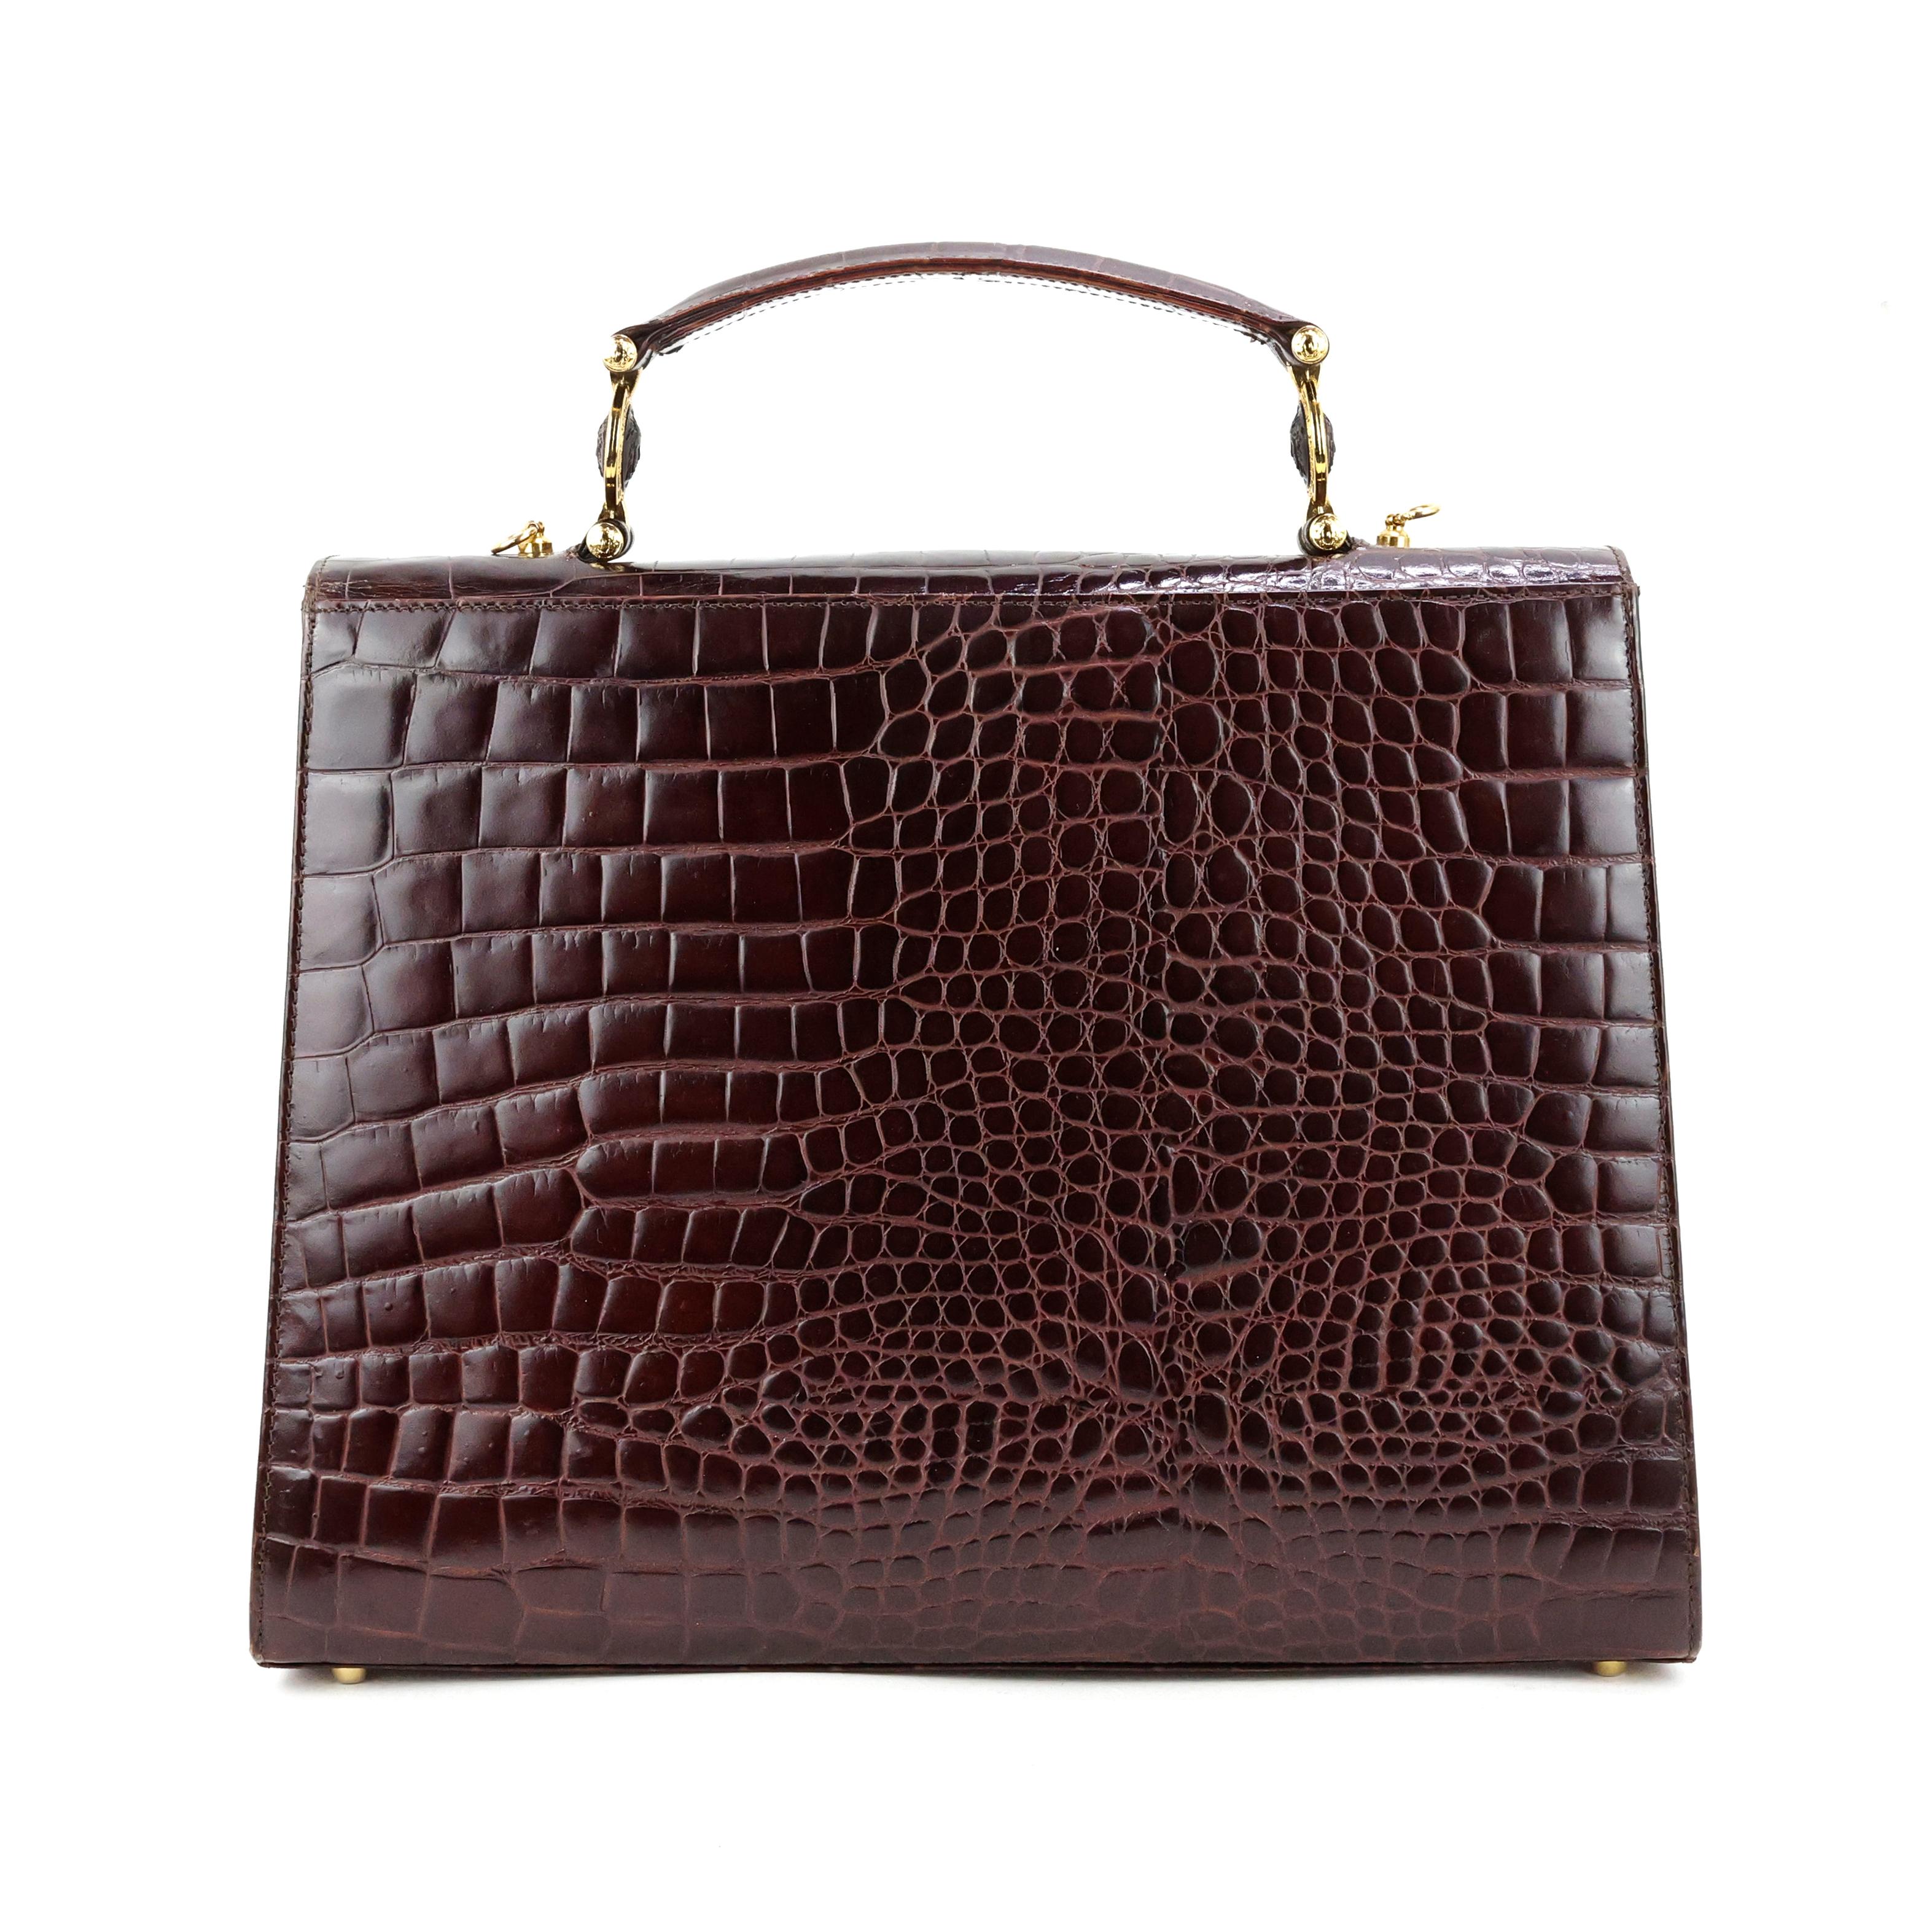 Gianni Versace Medusa Bag in Leather In Good Condition For Sale In Bressanone, IT